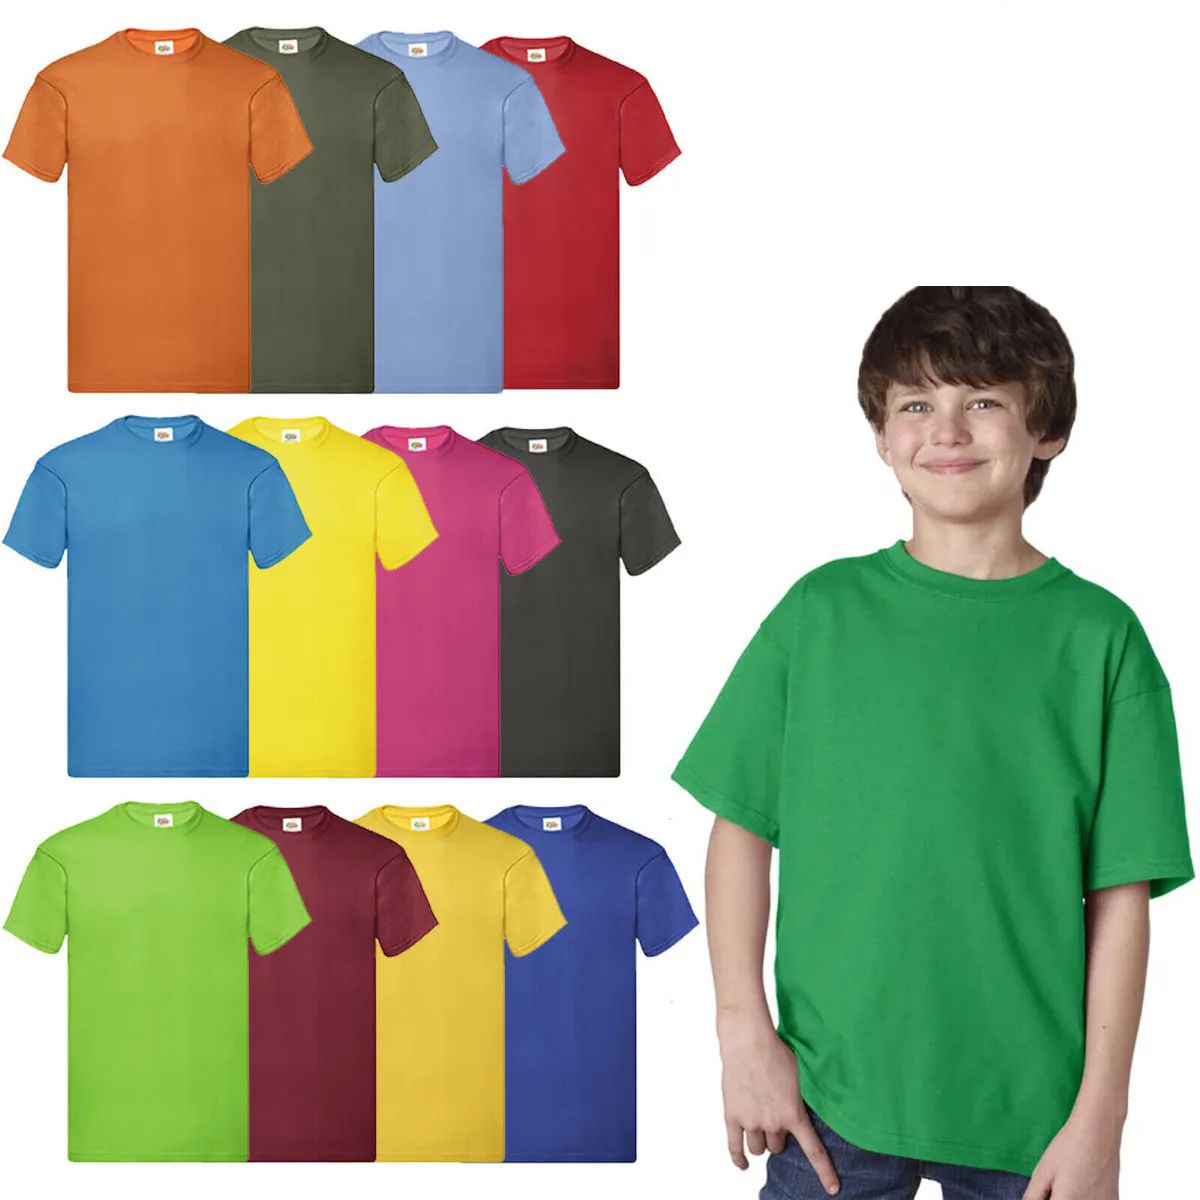 24 Pieces of Billionhats Kids Youth Cotton Assorted Colors T-Shirts Size Small